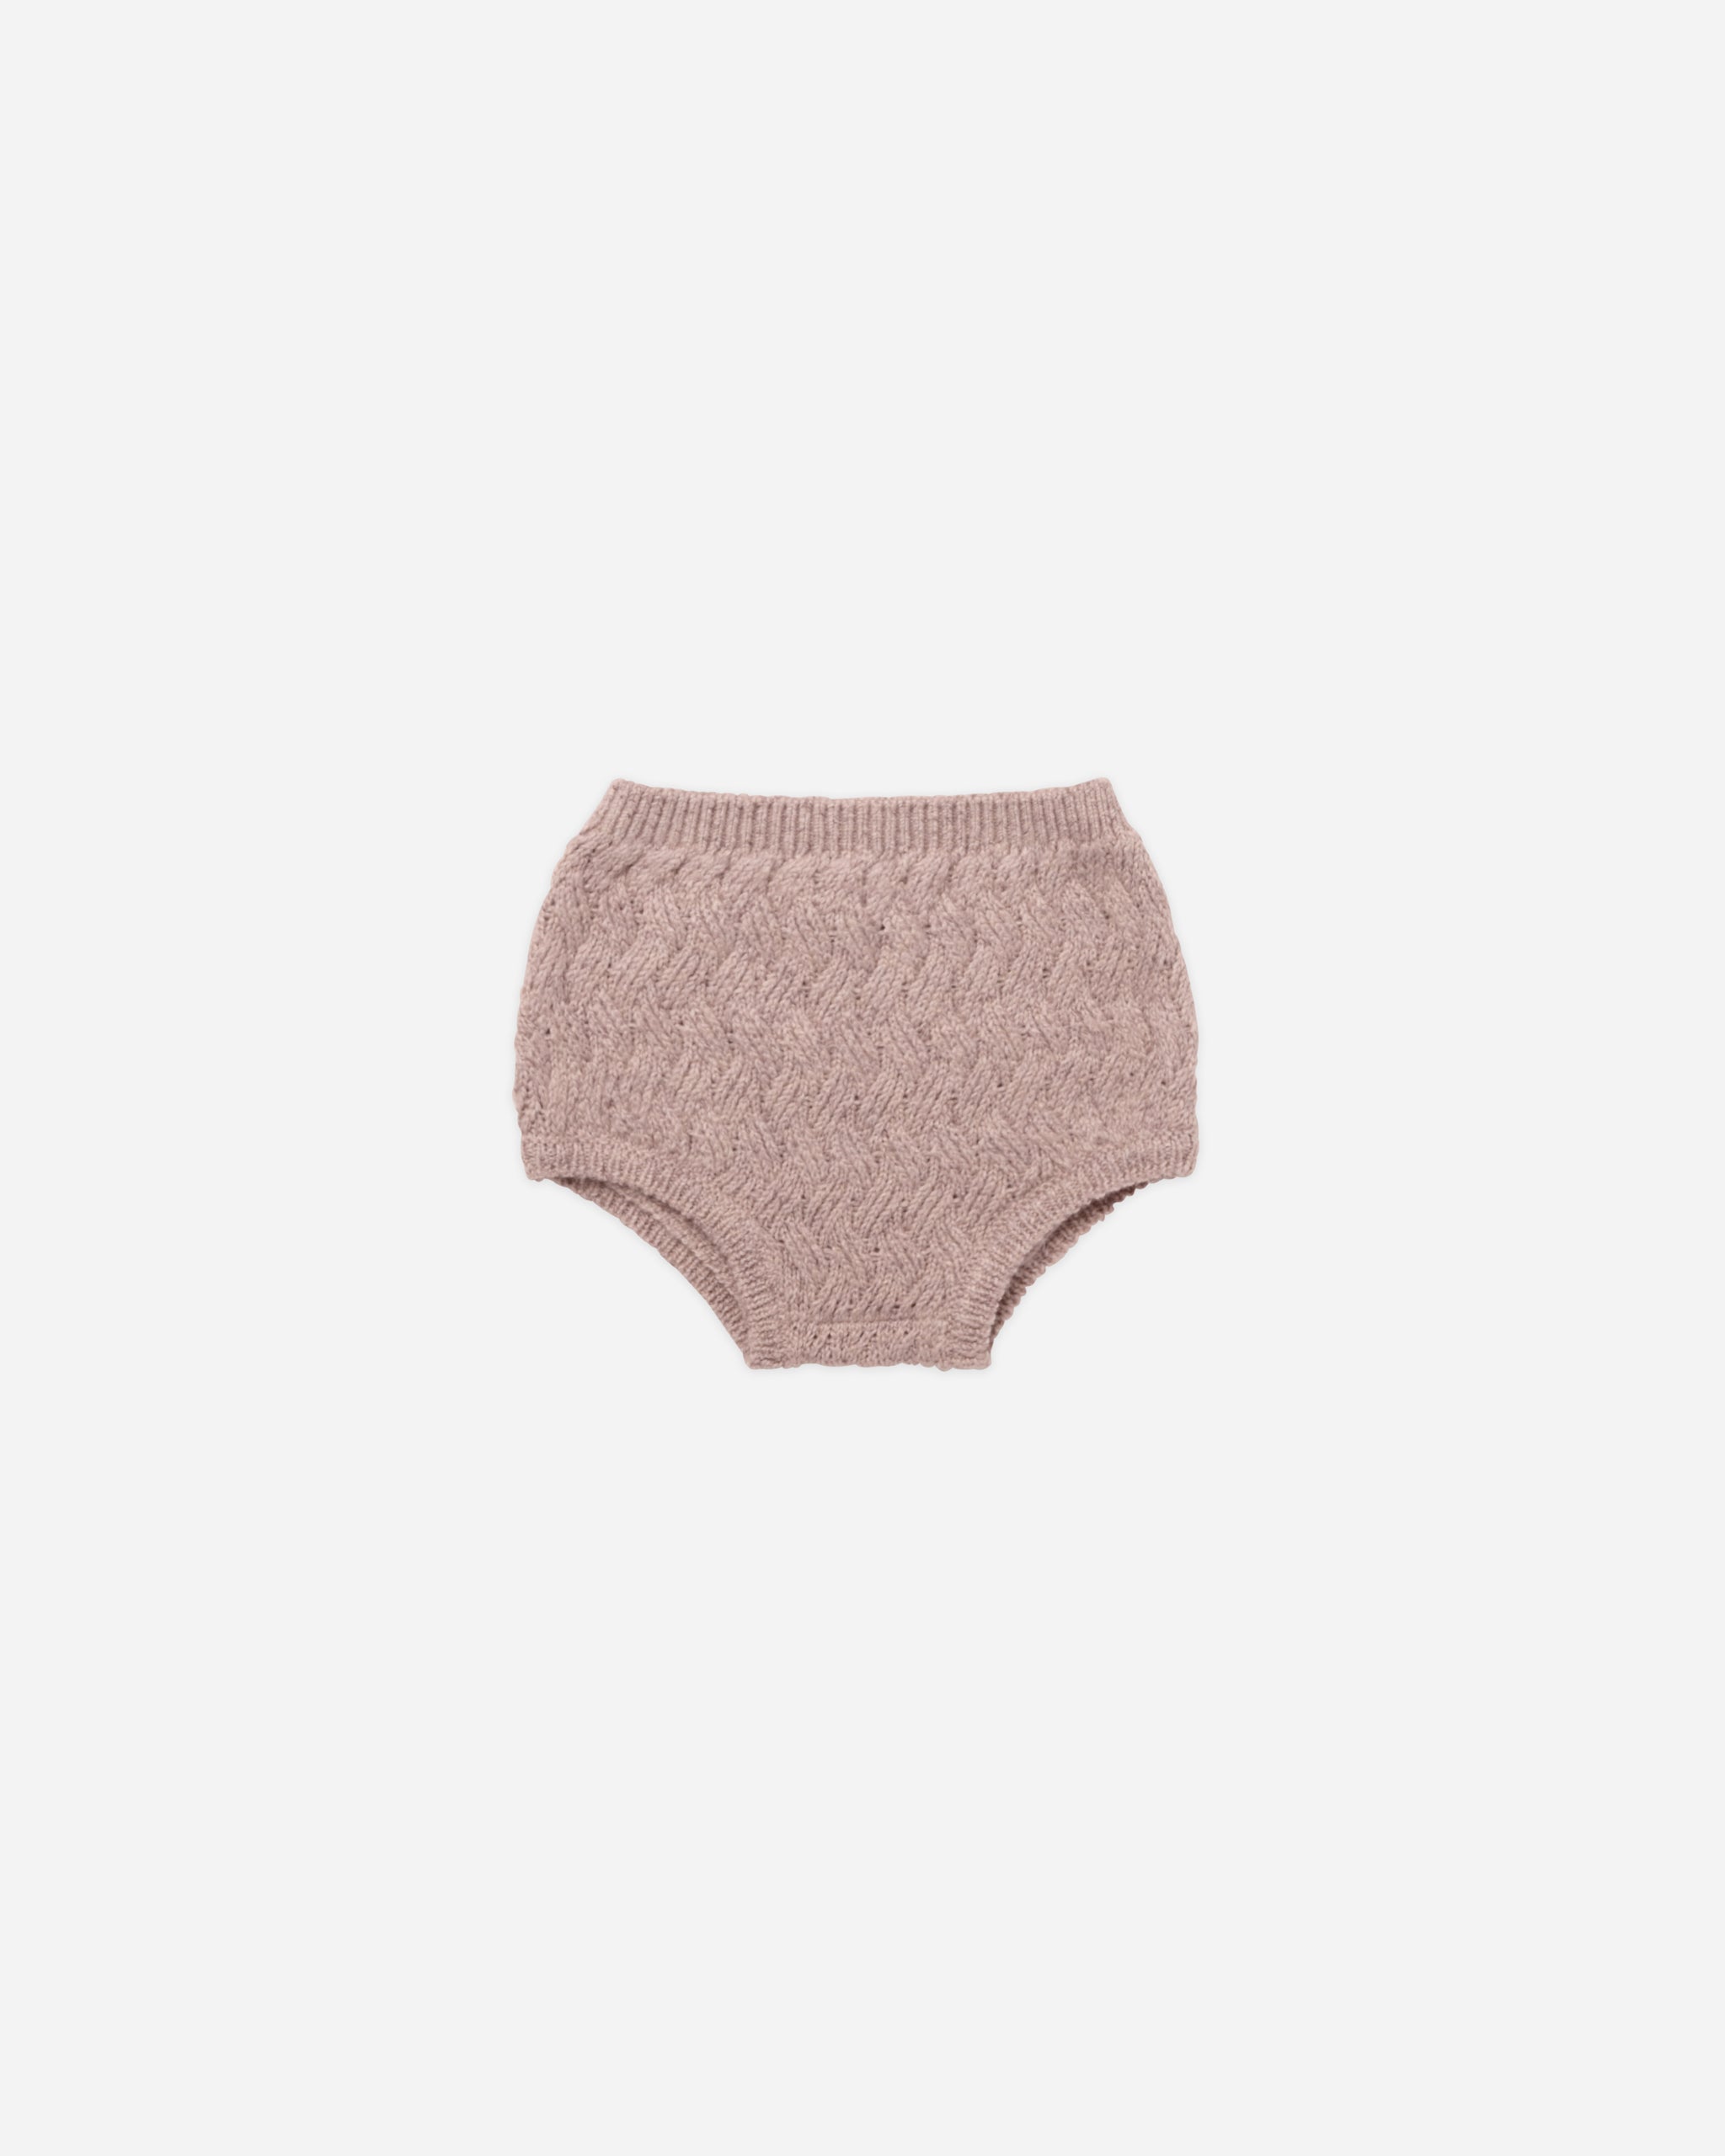 Knit Bloomer || Mauve - Rylee + Cru | Kids Clothes | Trendy Baby Clothes | Modern Infant Outfits |